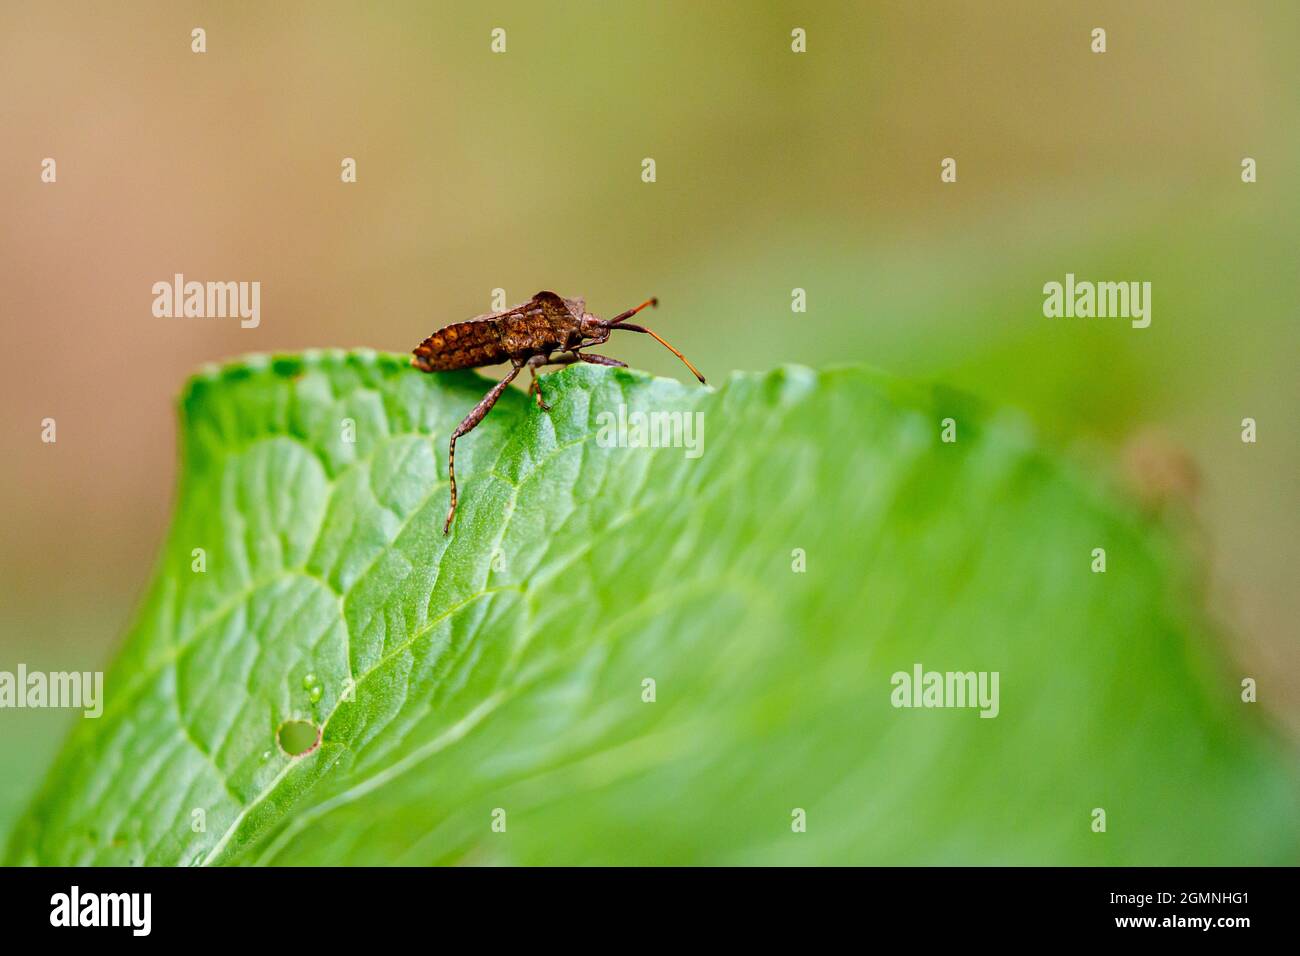 A bug and beetle on a leaf Stock Photo